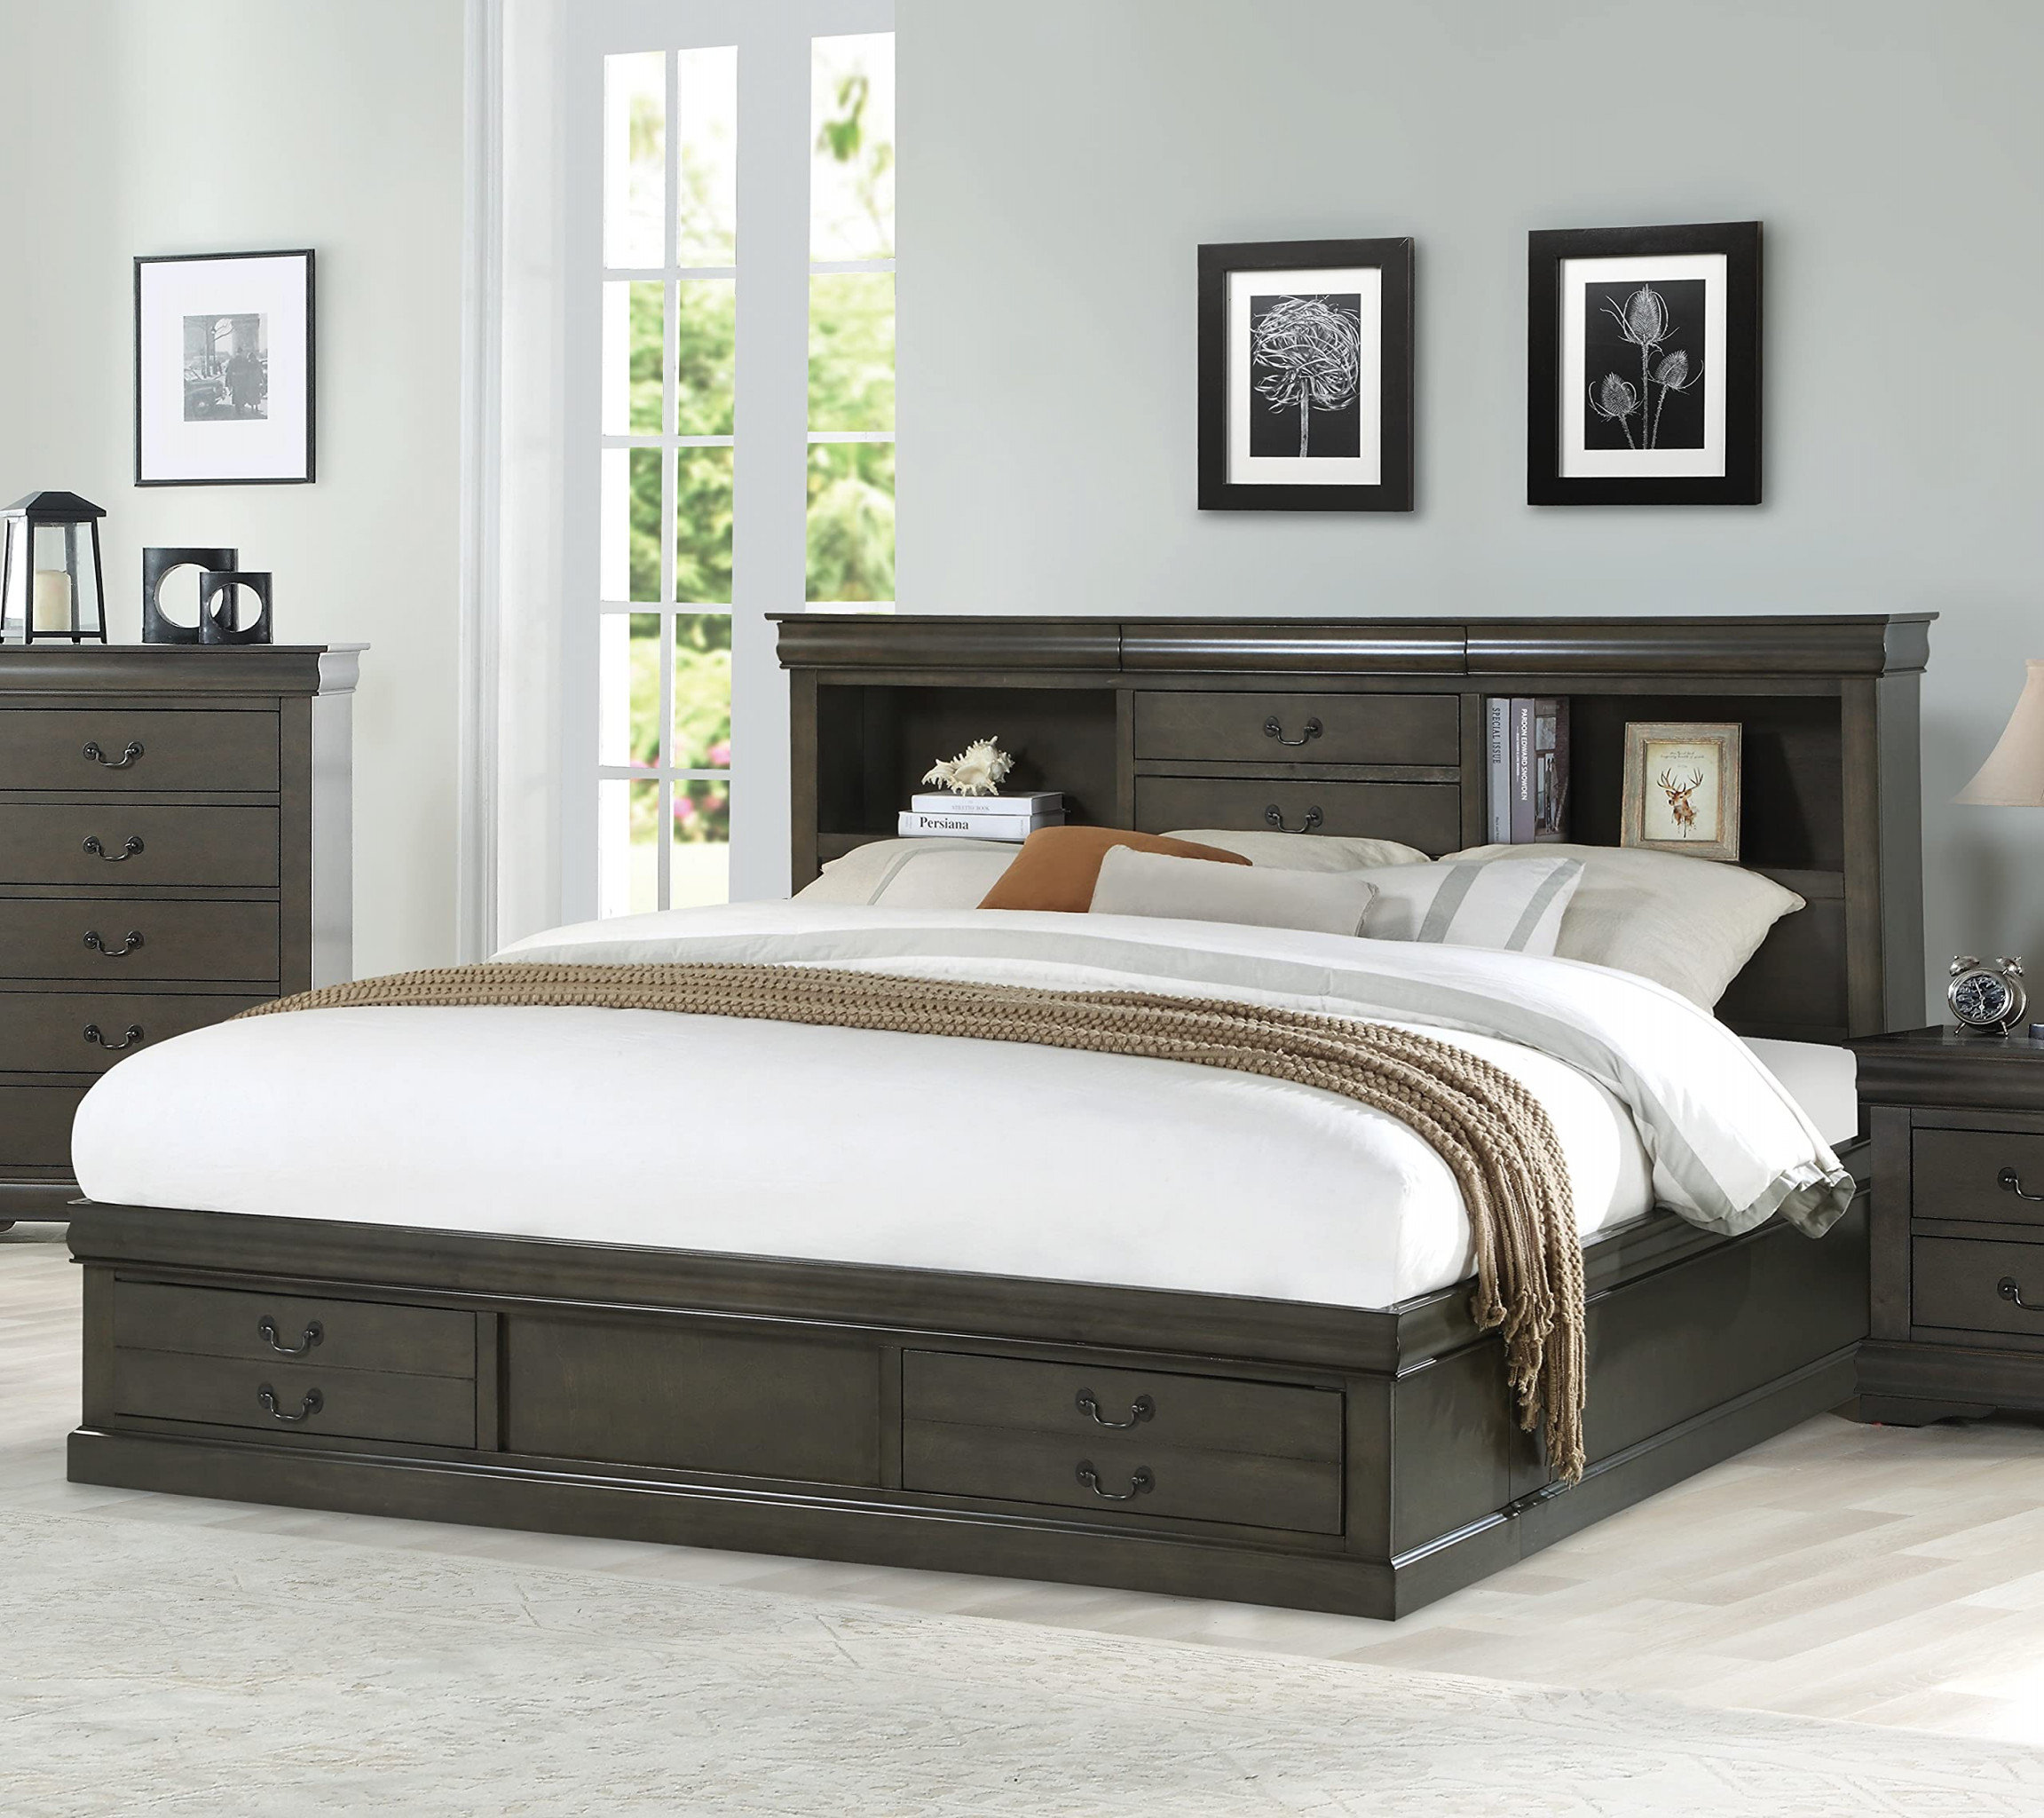 King Size Bed Frame With Headboard And Footboard